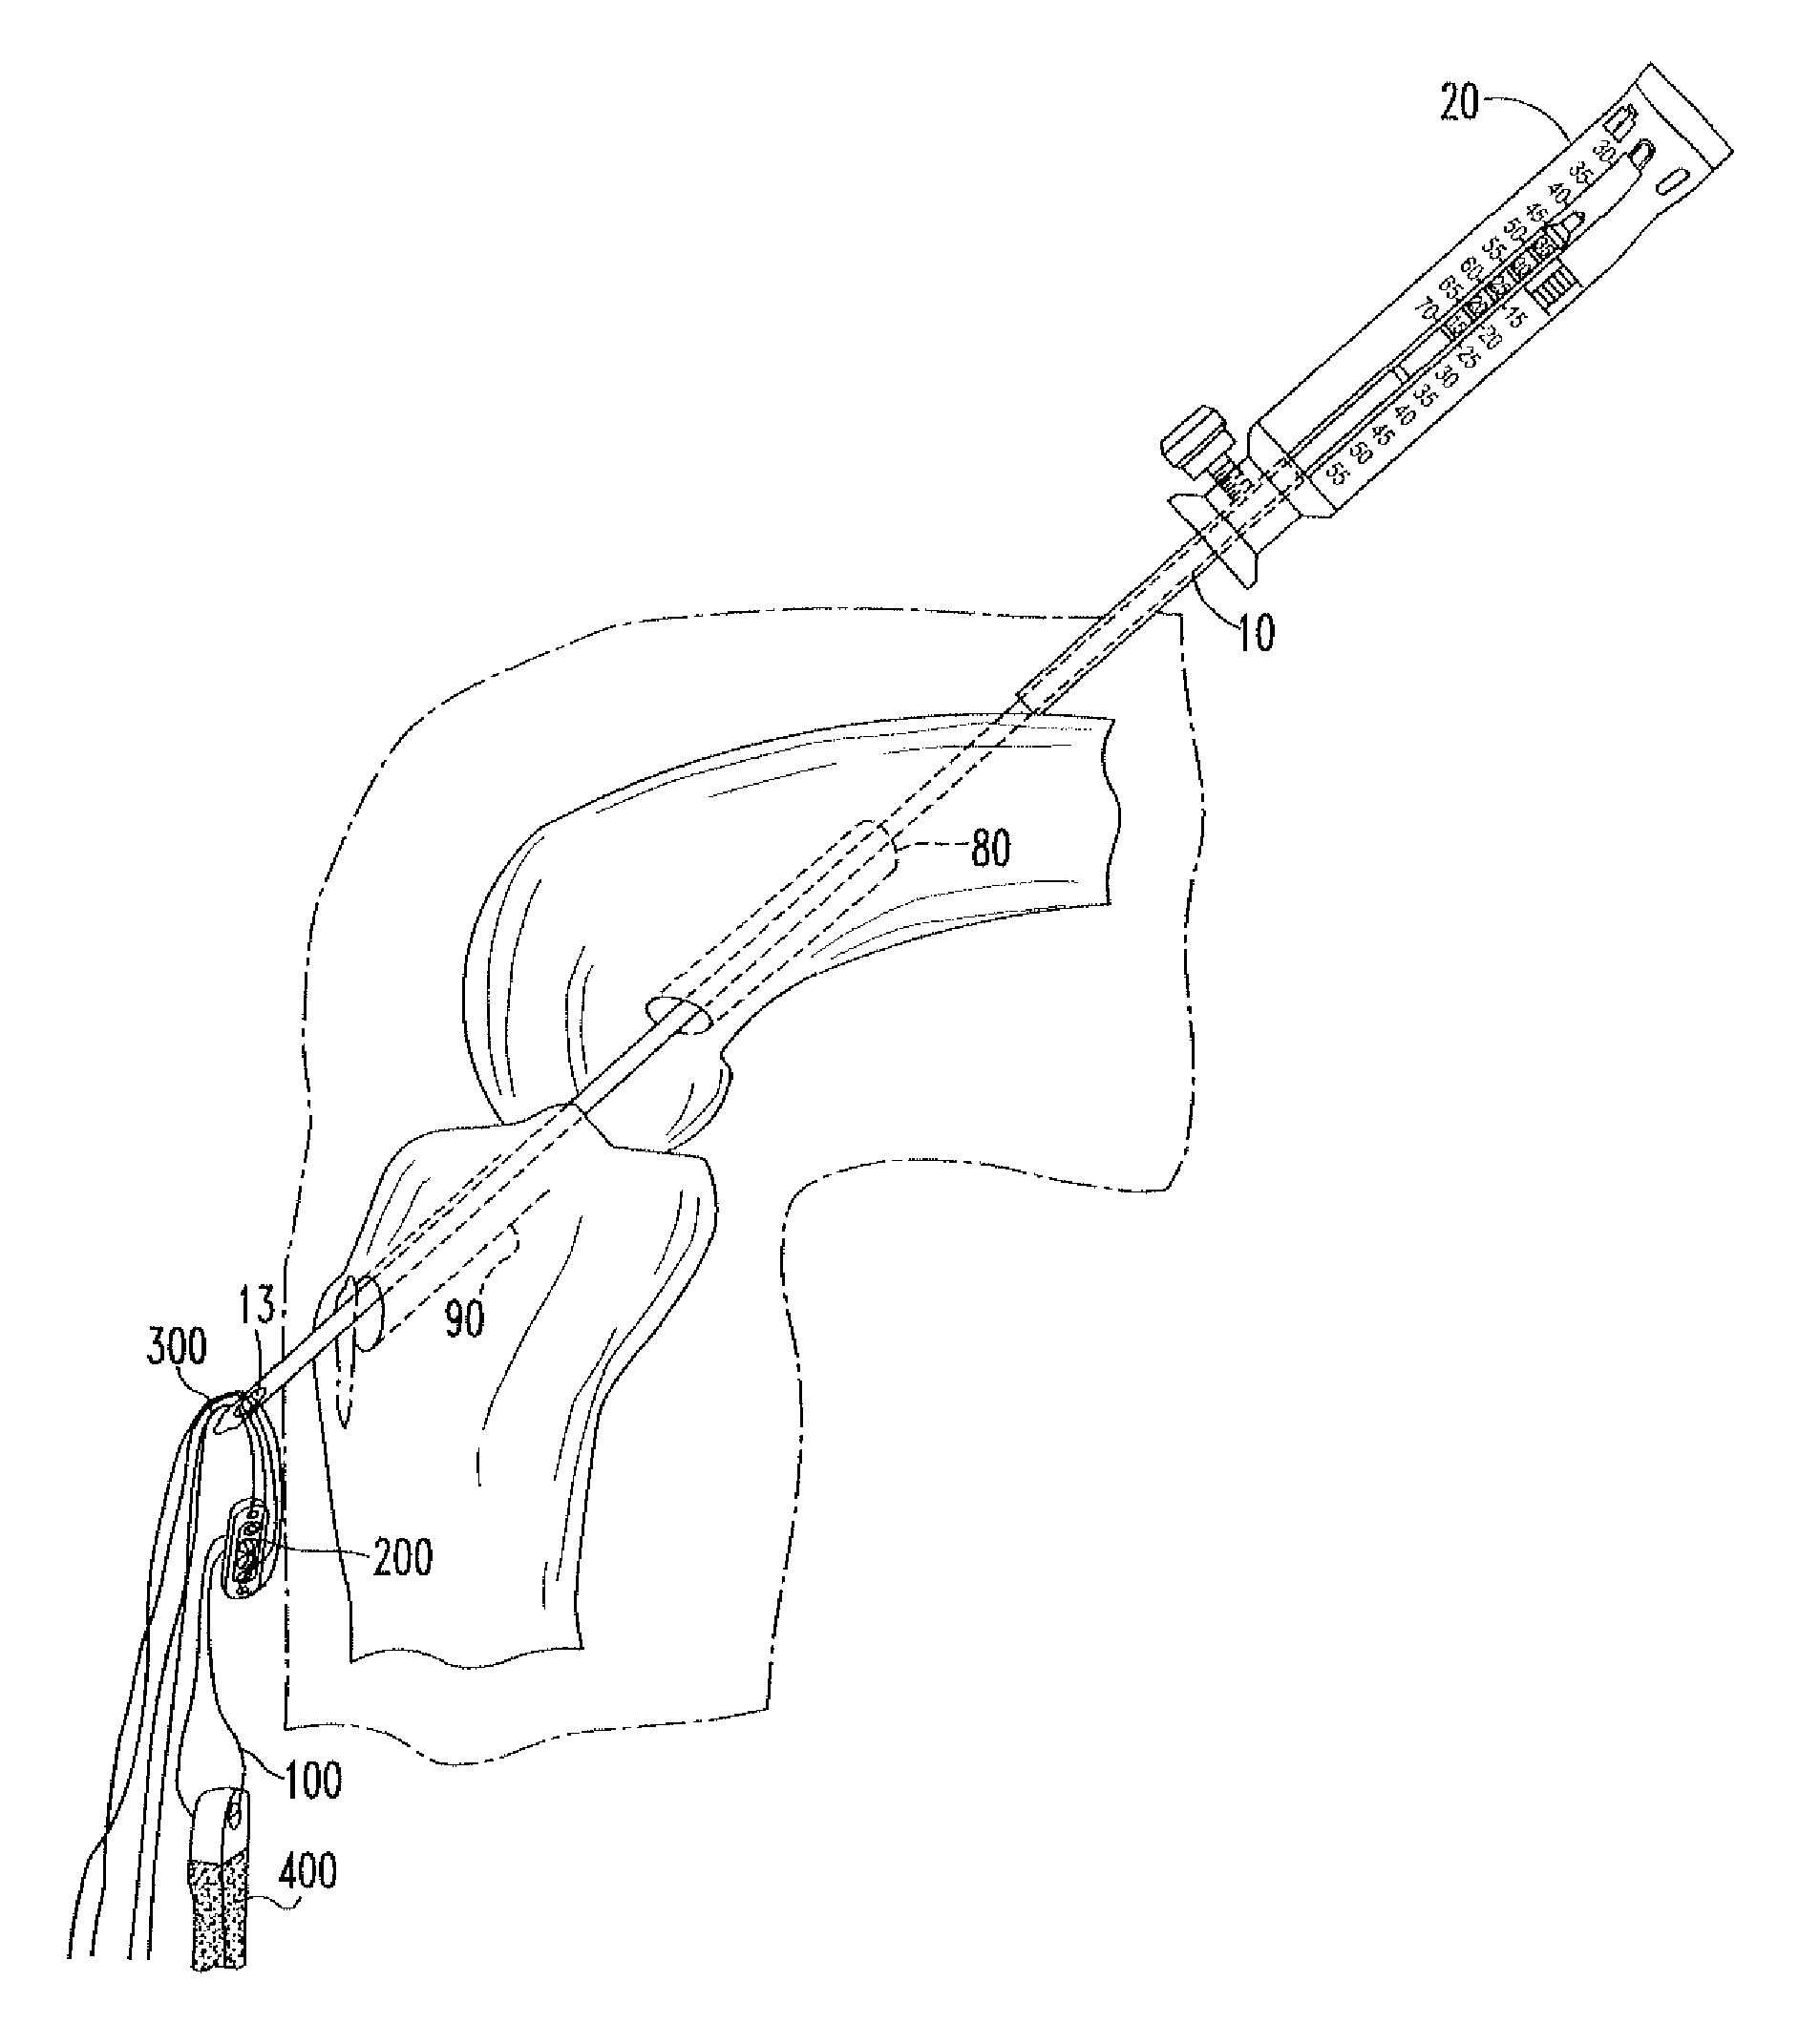 Device and method for use during ligament reconstruction surgery